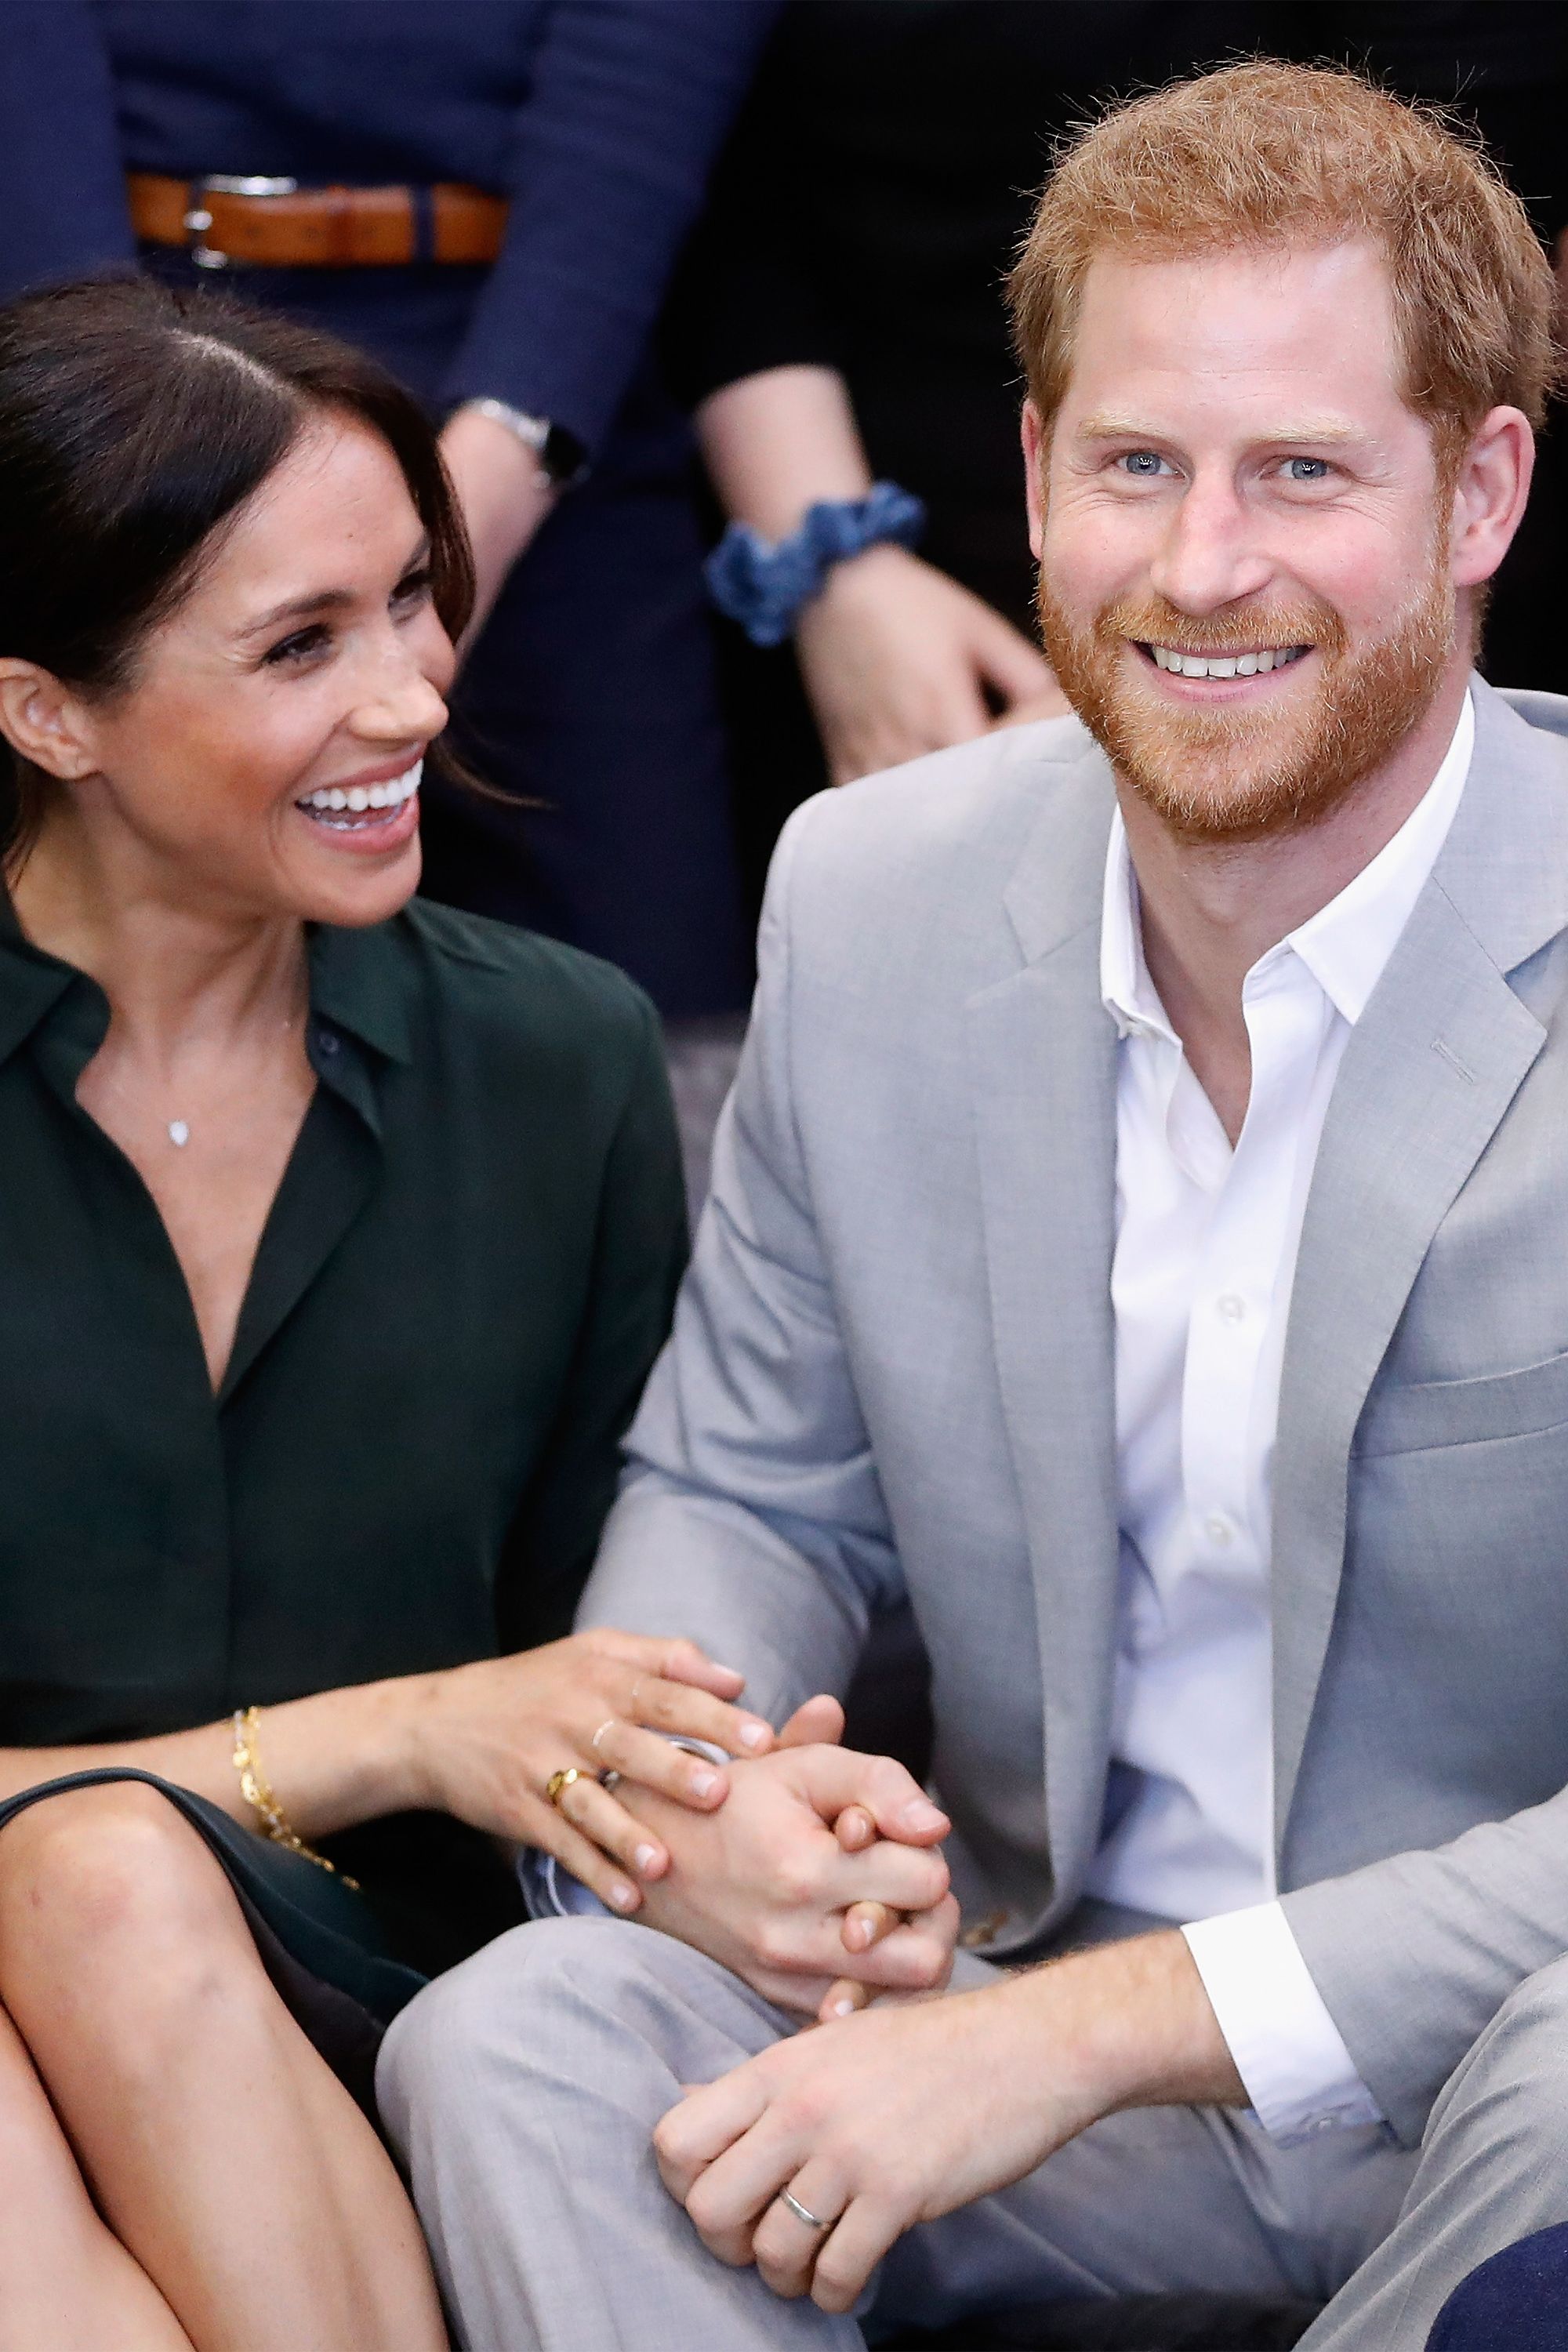 https://hips.hearstapps.com/hmg-prod.s3.amazonaws.com/images/hbz-prince-harry-meghan-markle-cute-moments-2018-10-gettyimages-1045629908.jpg?crop=1xw:1xh;center,top